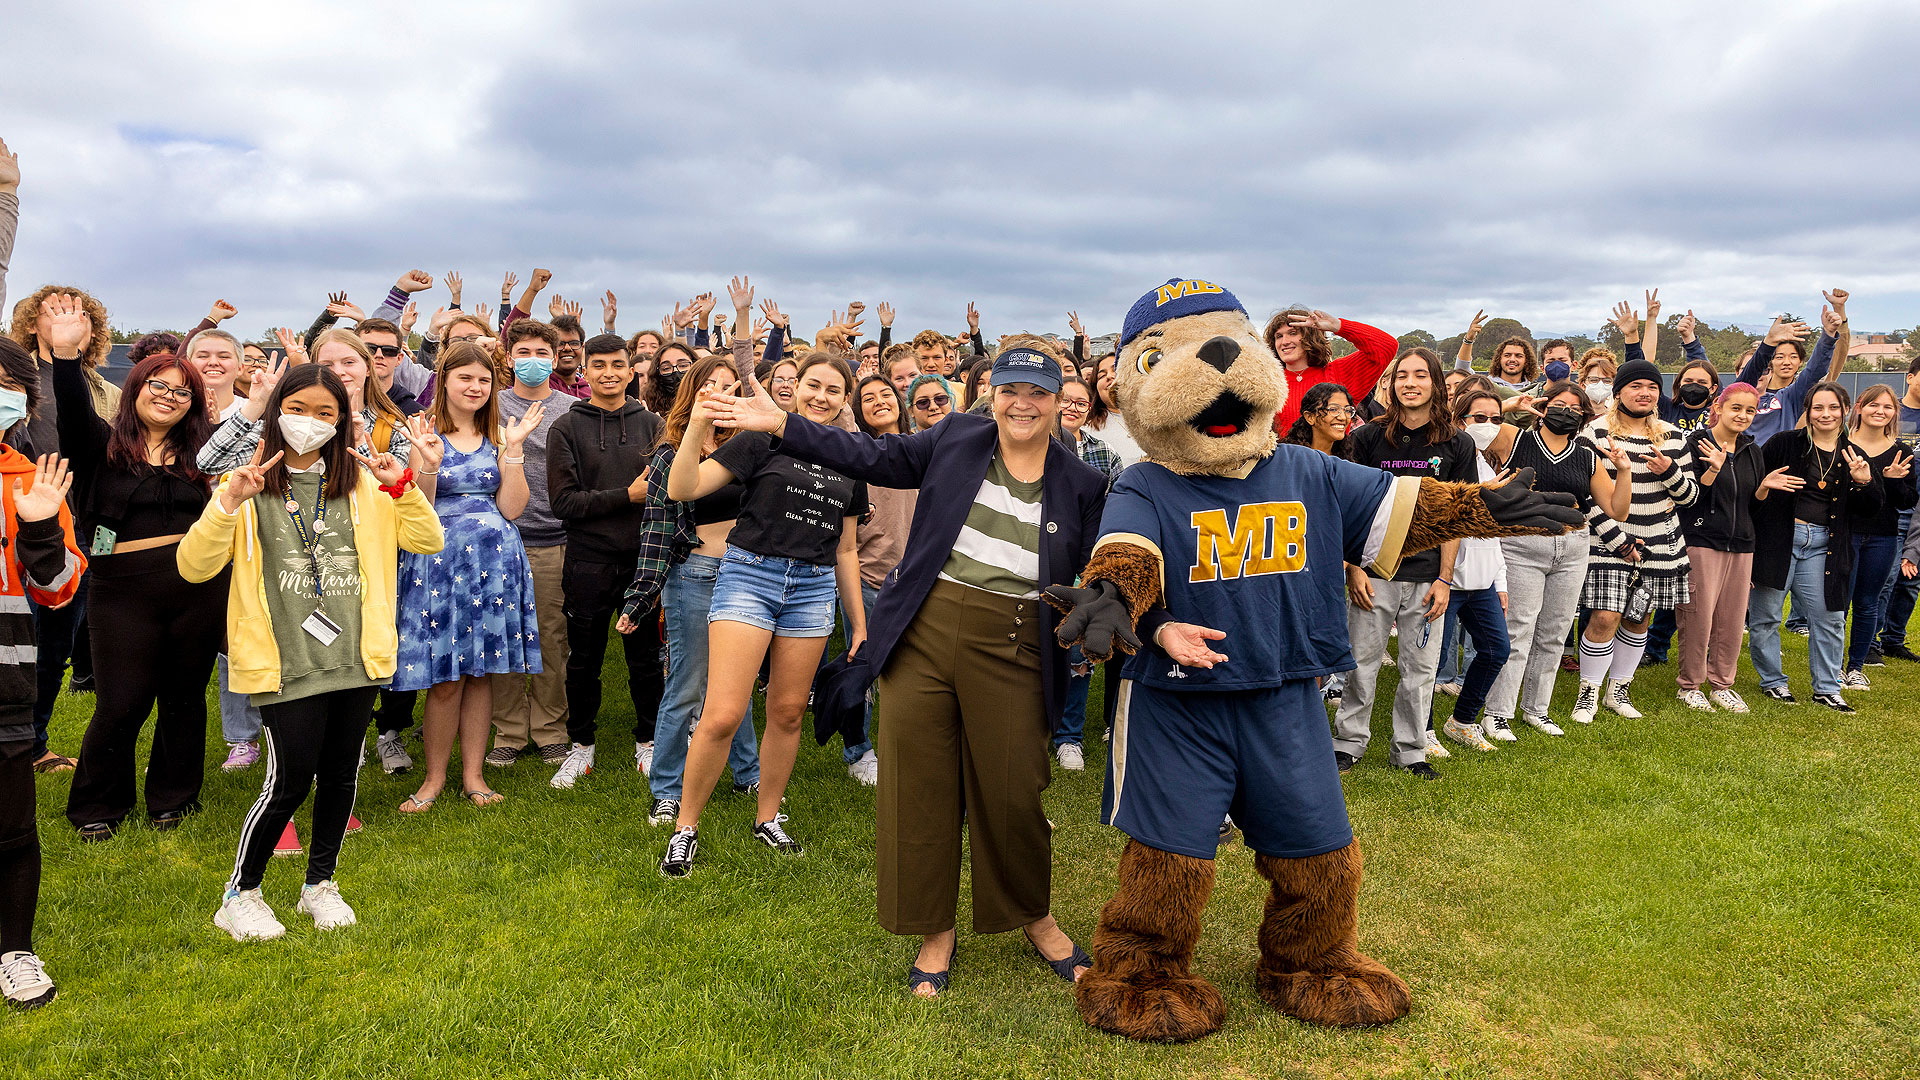 President Quiñones at the Student Convocation with a group of students and Monte the mascot